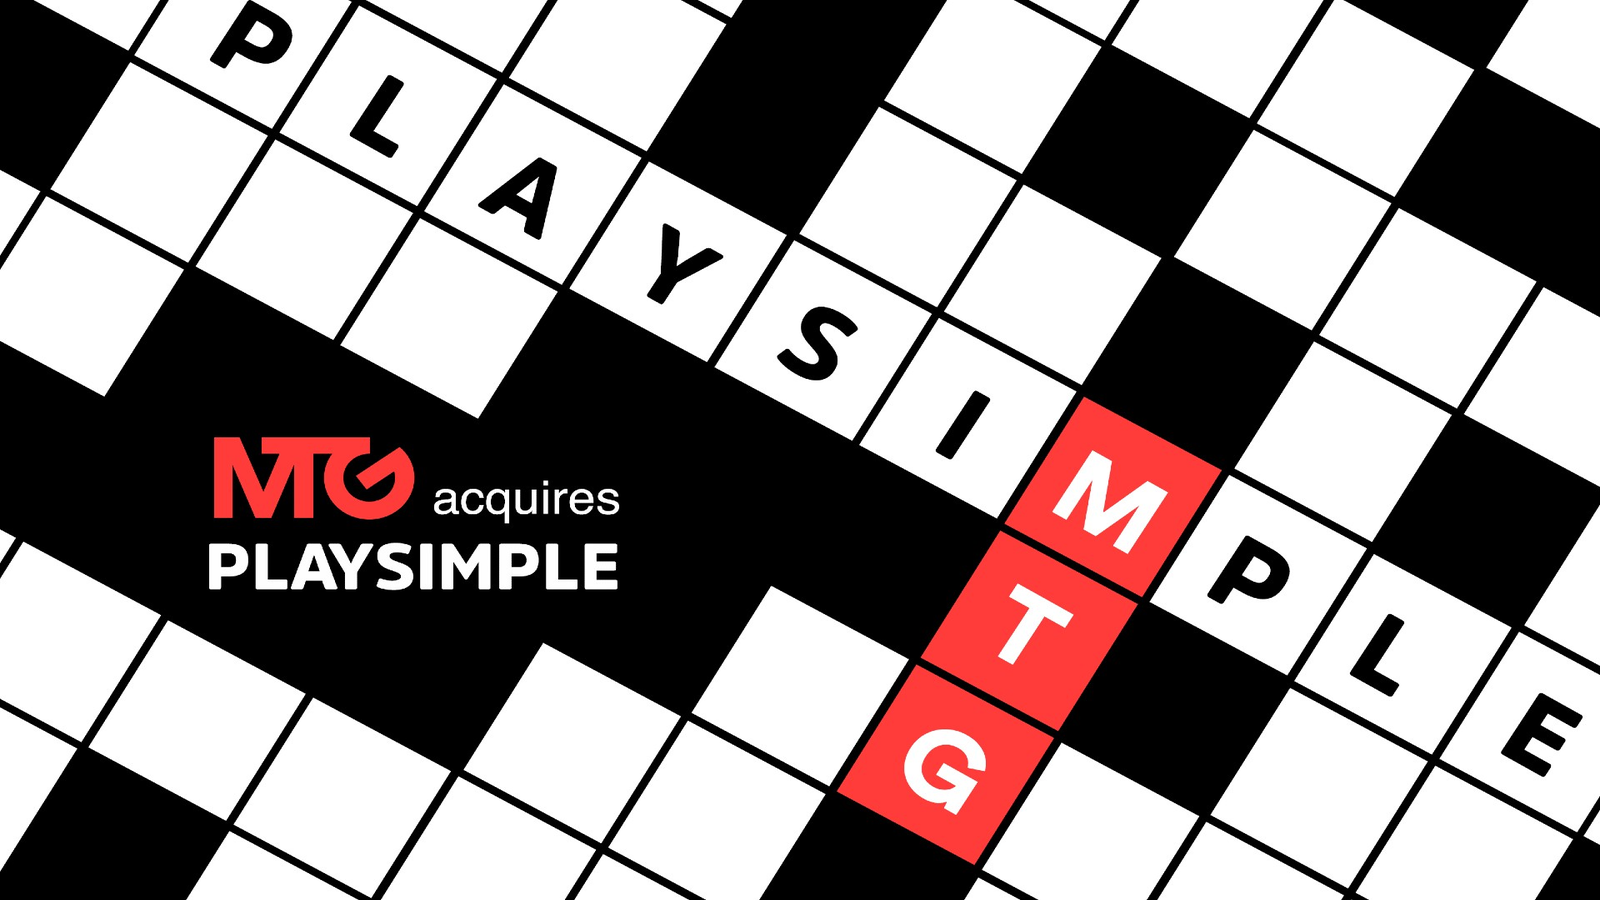 MTG acquires PlaySimple in $510m deal